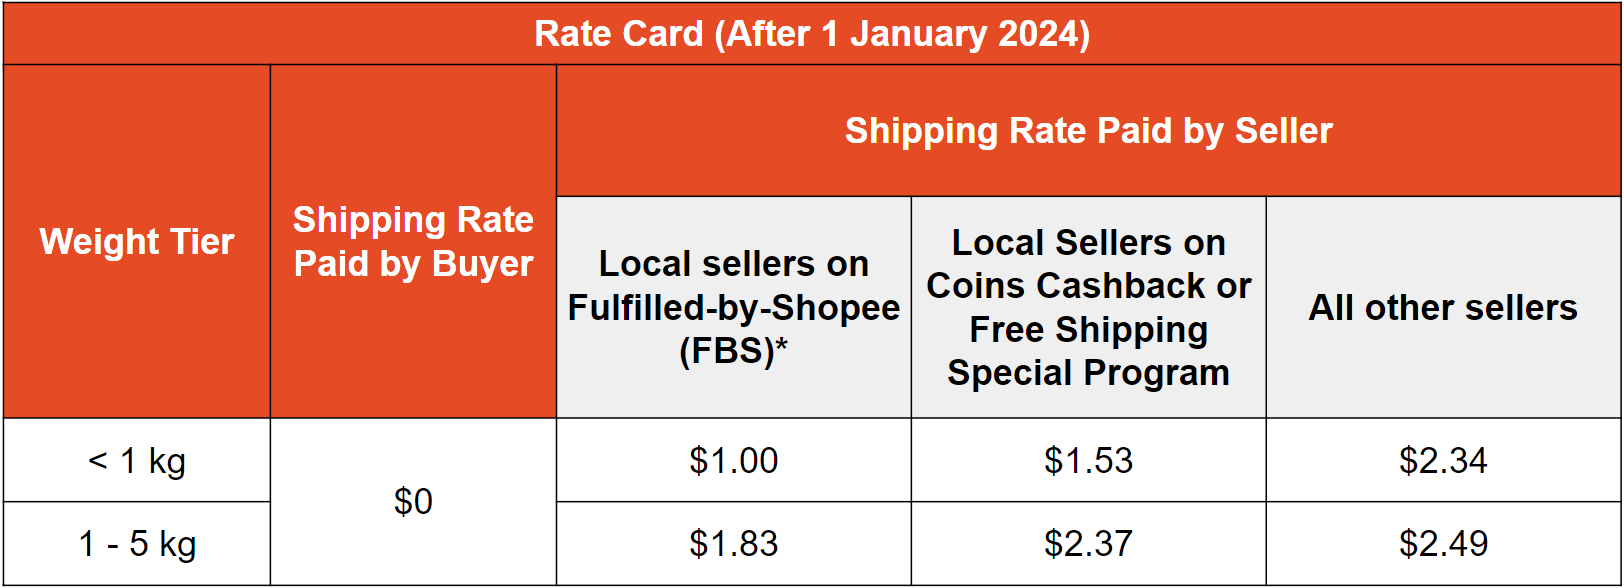 J&T Shipping Fee Rates & Transparency, Announcements on Carousell